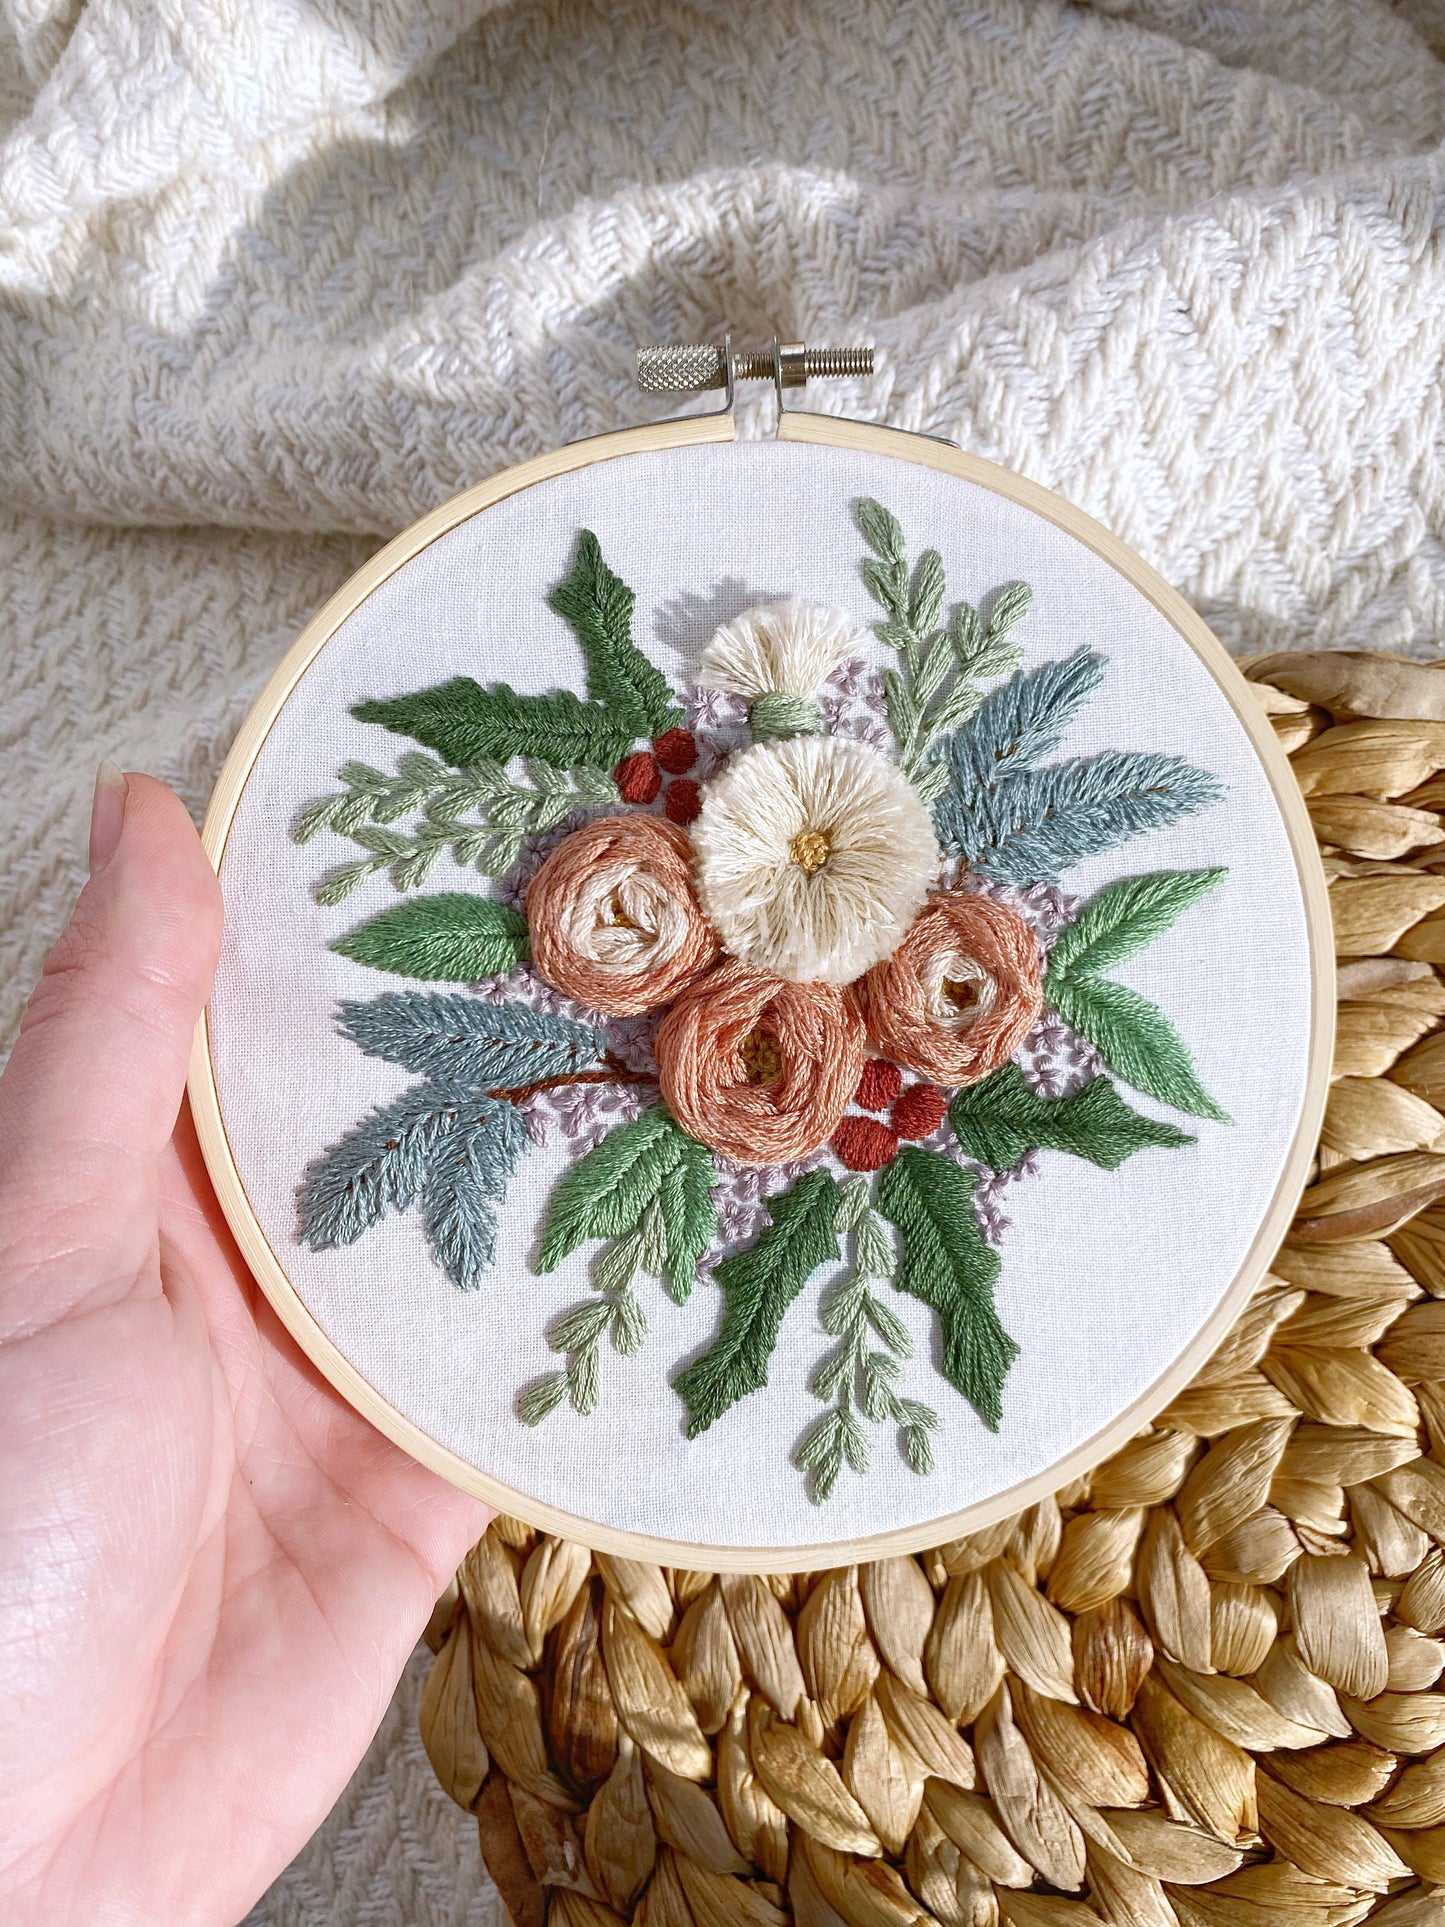 Frosted Florals | 6” Embroidery Hoop | Delicate Modern Floral Embroidery Art for Cozy Home Decor, Everlasting Flowers, Winter Greenery